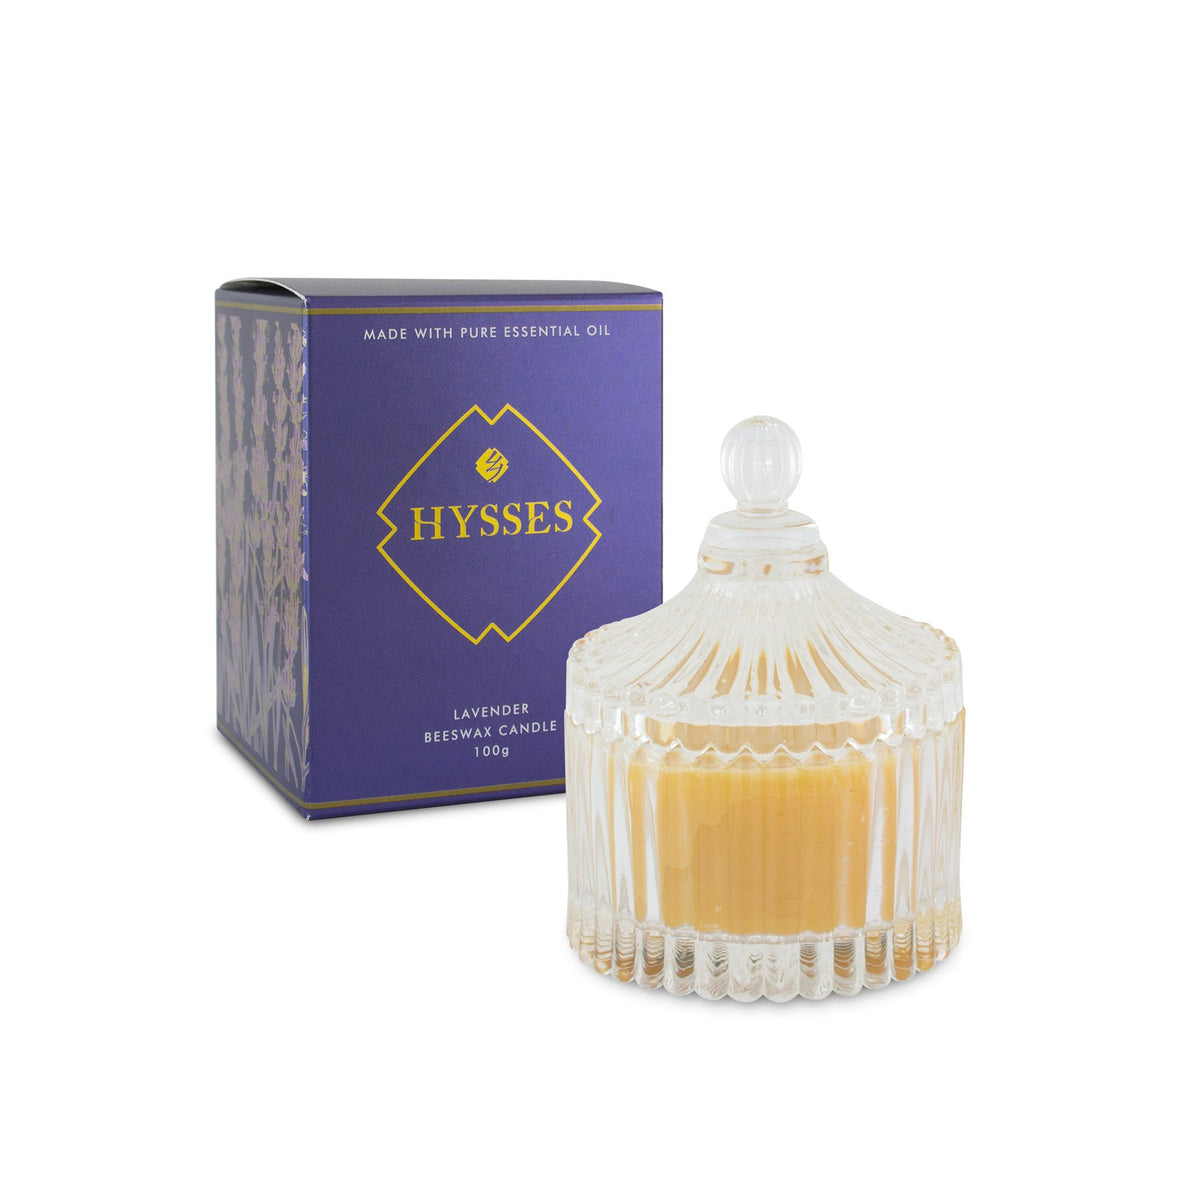 Beeswax Candle Lavender